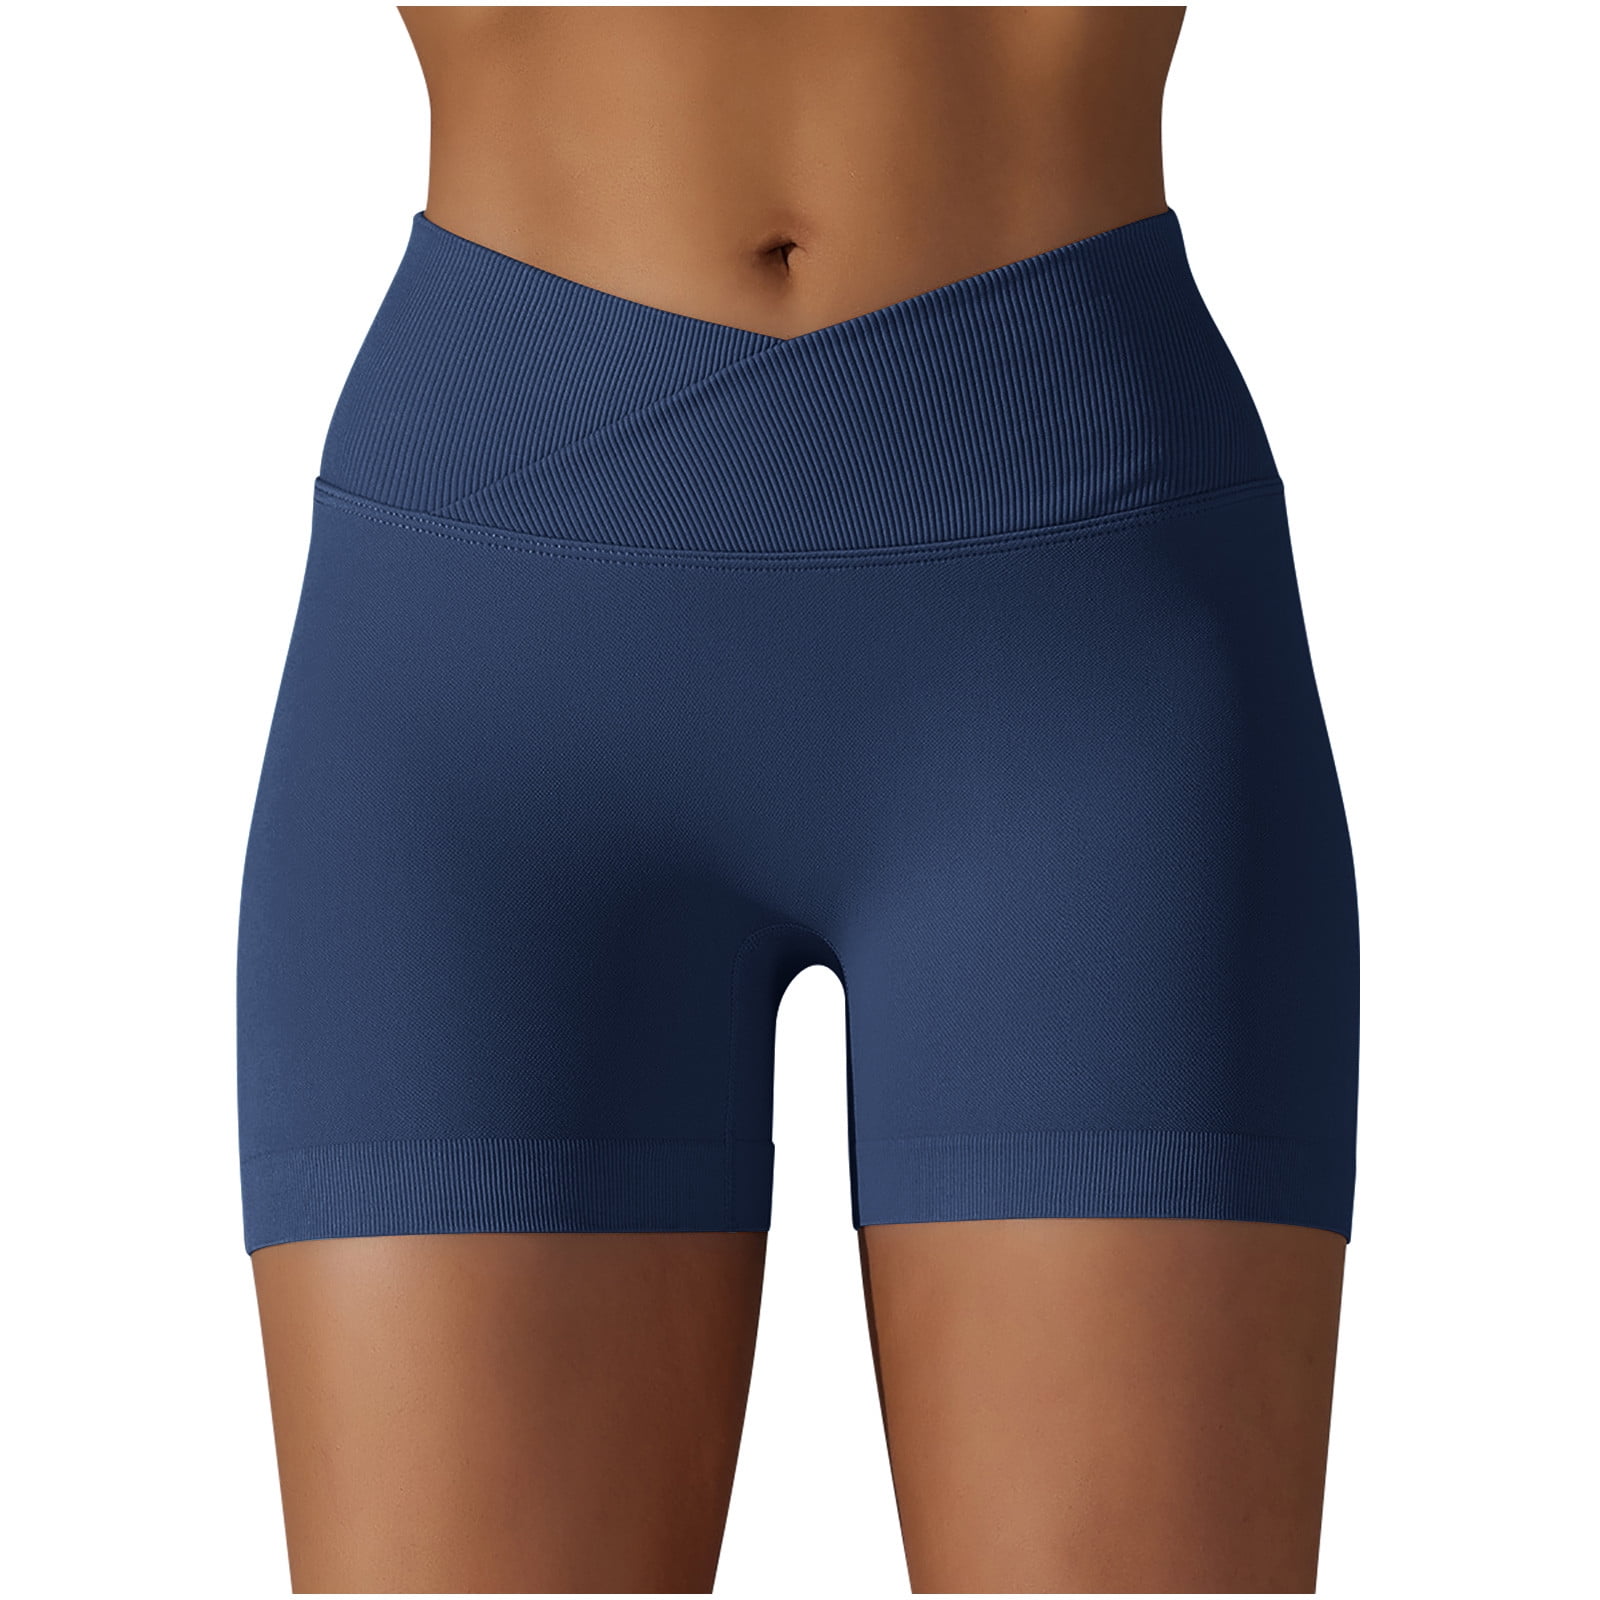 Seamless knitting breathable solid color cross waist yoga shorts running  fitness Hot Shorts women - The Little Connection